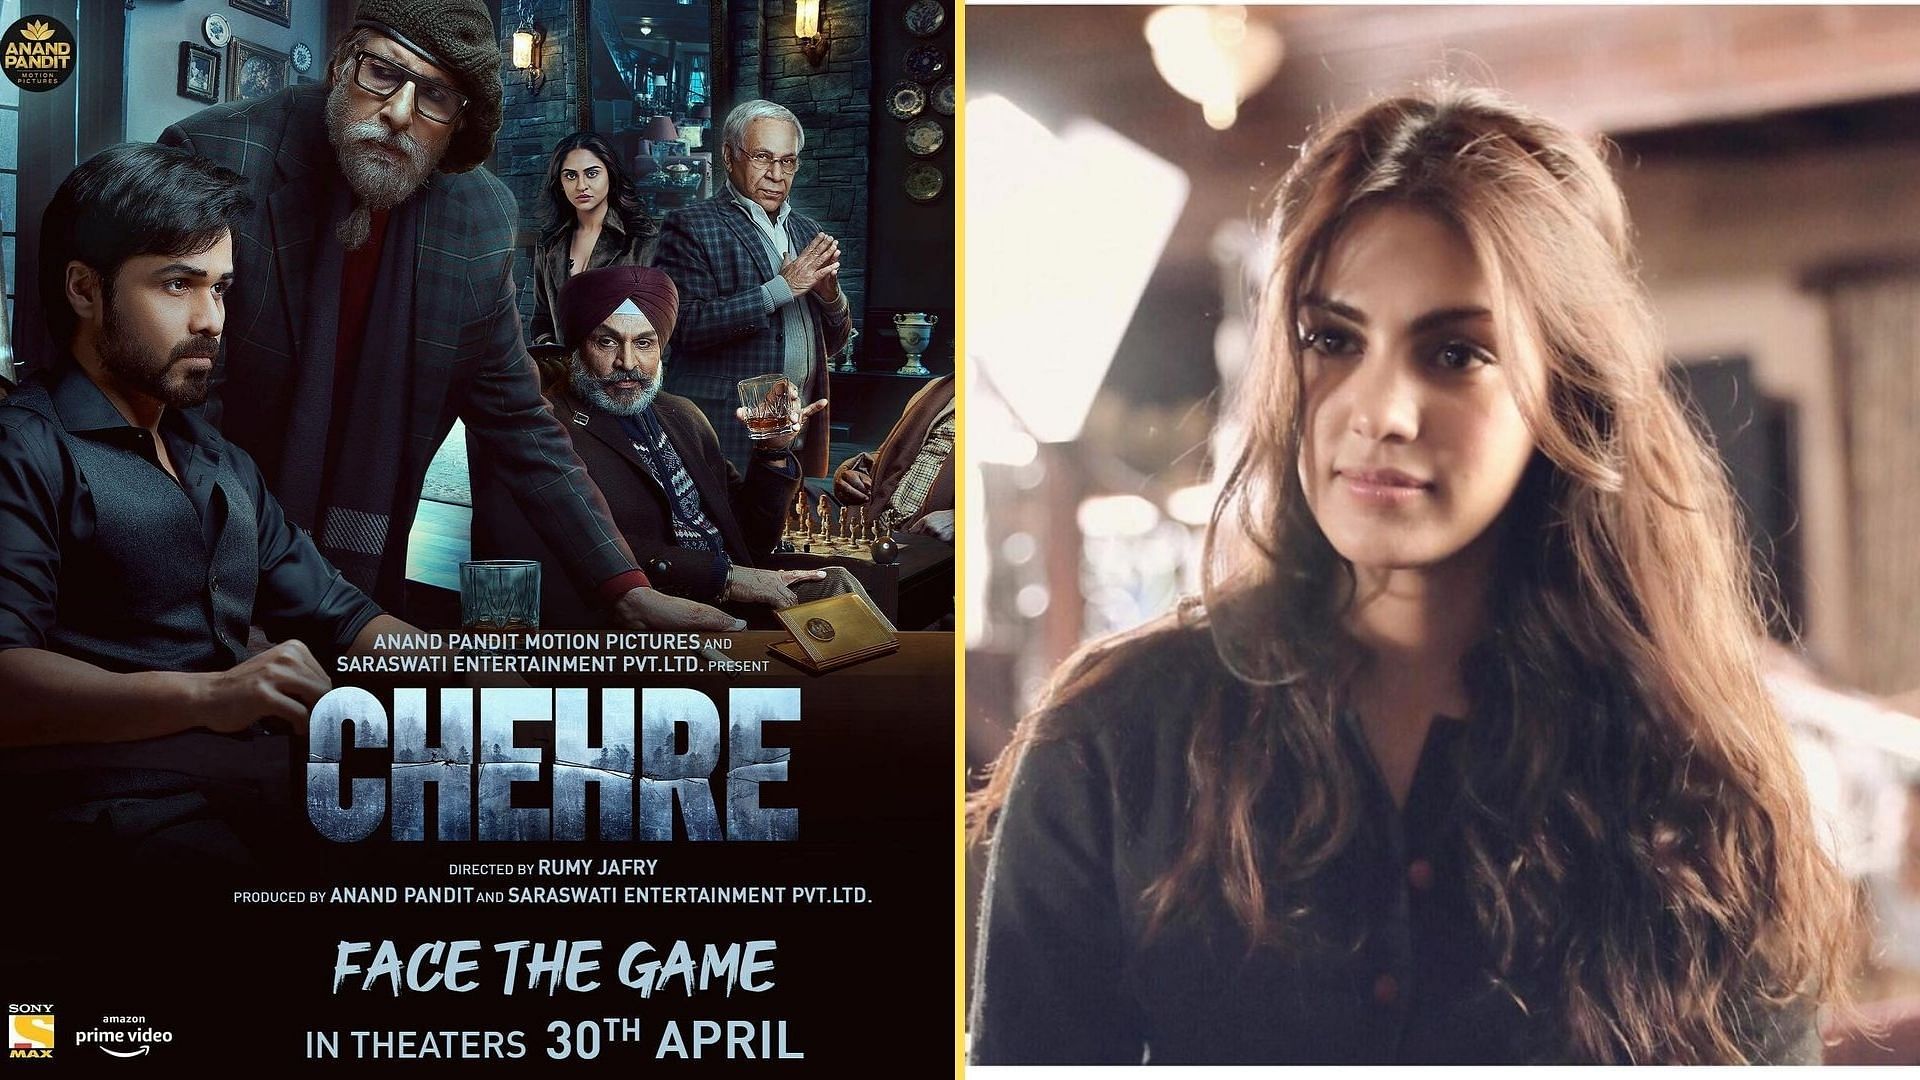  <p>The ‘Chehre’ poster that is being shared. Rhea Chakraborty is absent.</p>